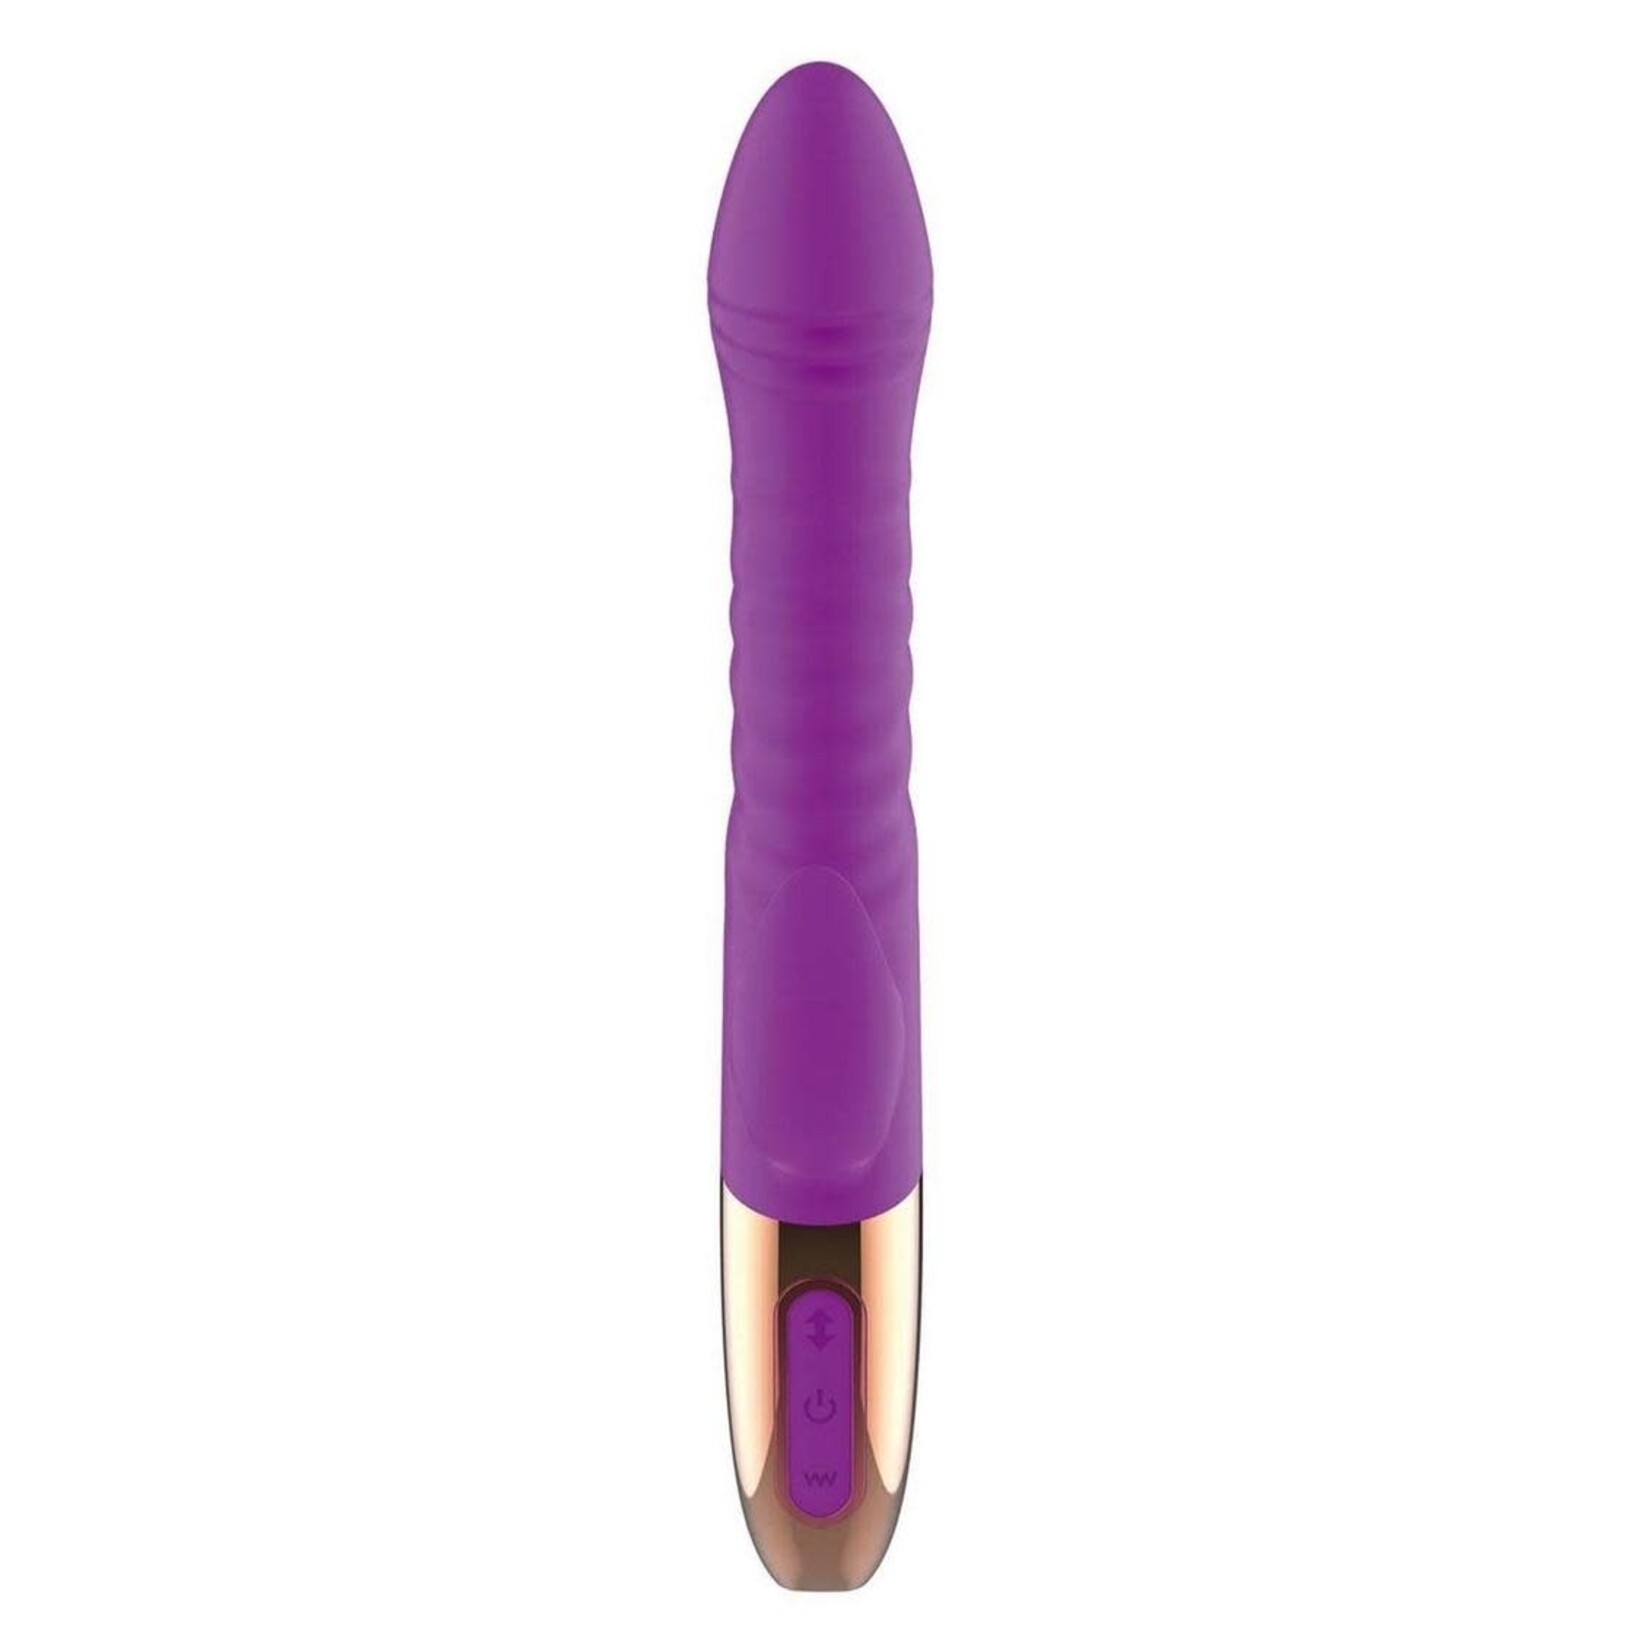 Goddess Thrusting Delight Rechargeable Silicone Dual Stimulating Vibrator - Purple